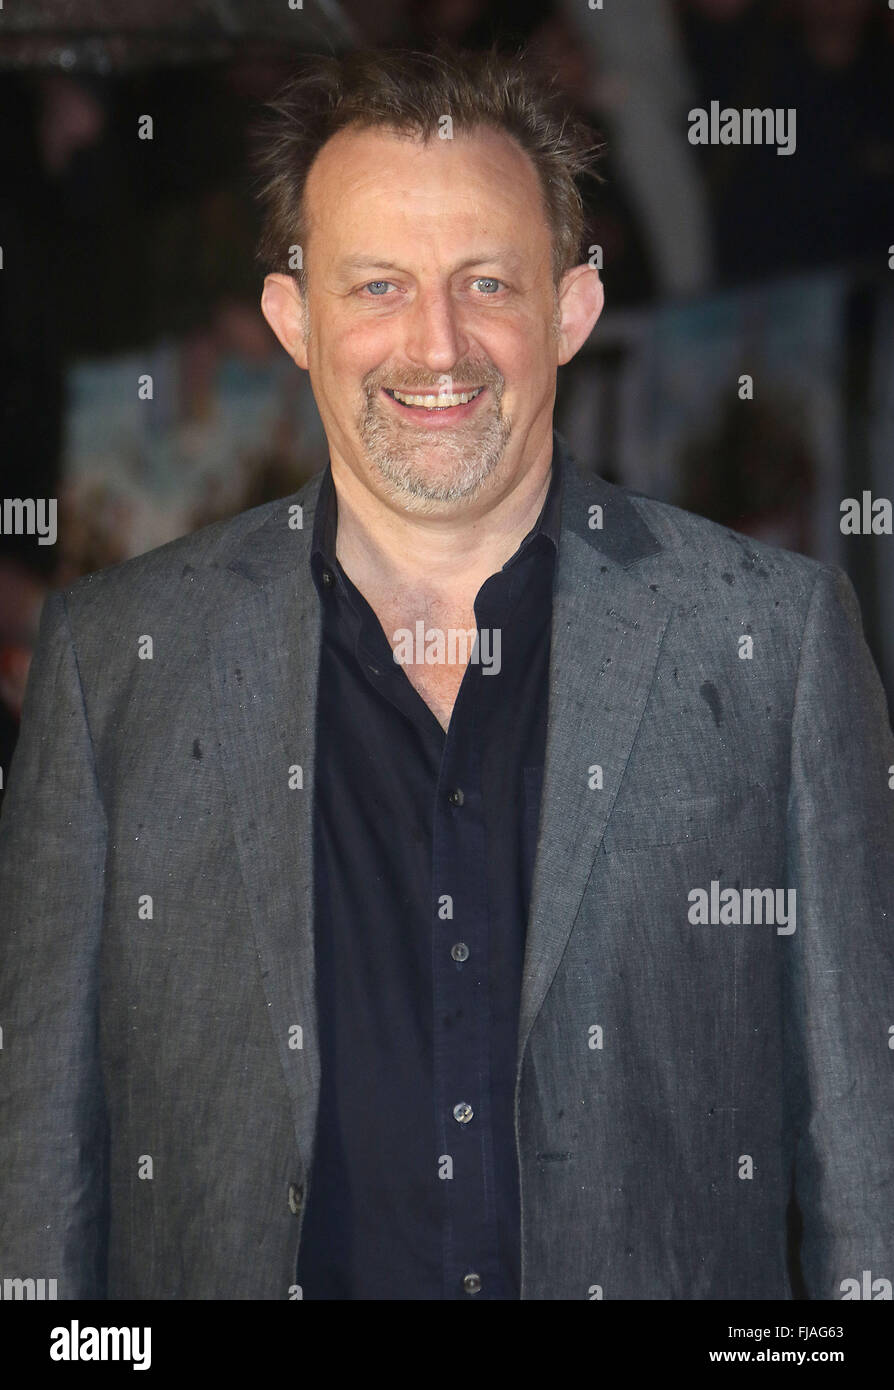 January 26, 2016 - Writer Hamish McColl attending 'Dad's Army' World Premiere, Odeon Leicester Square in London, UK. Stock Photo